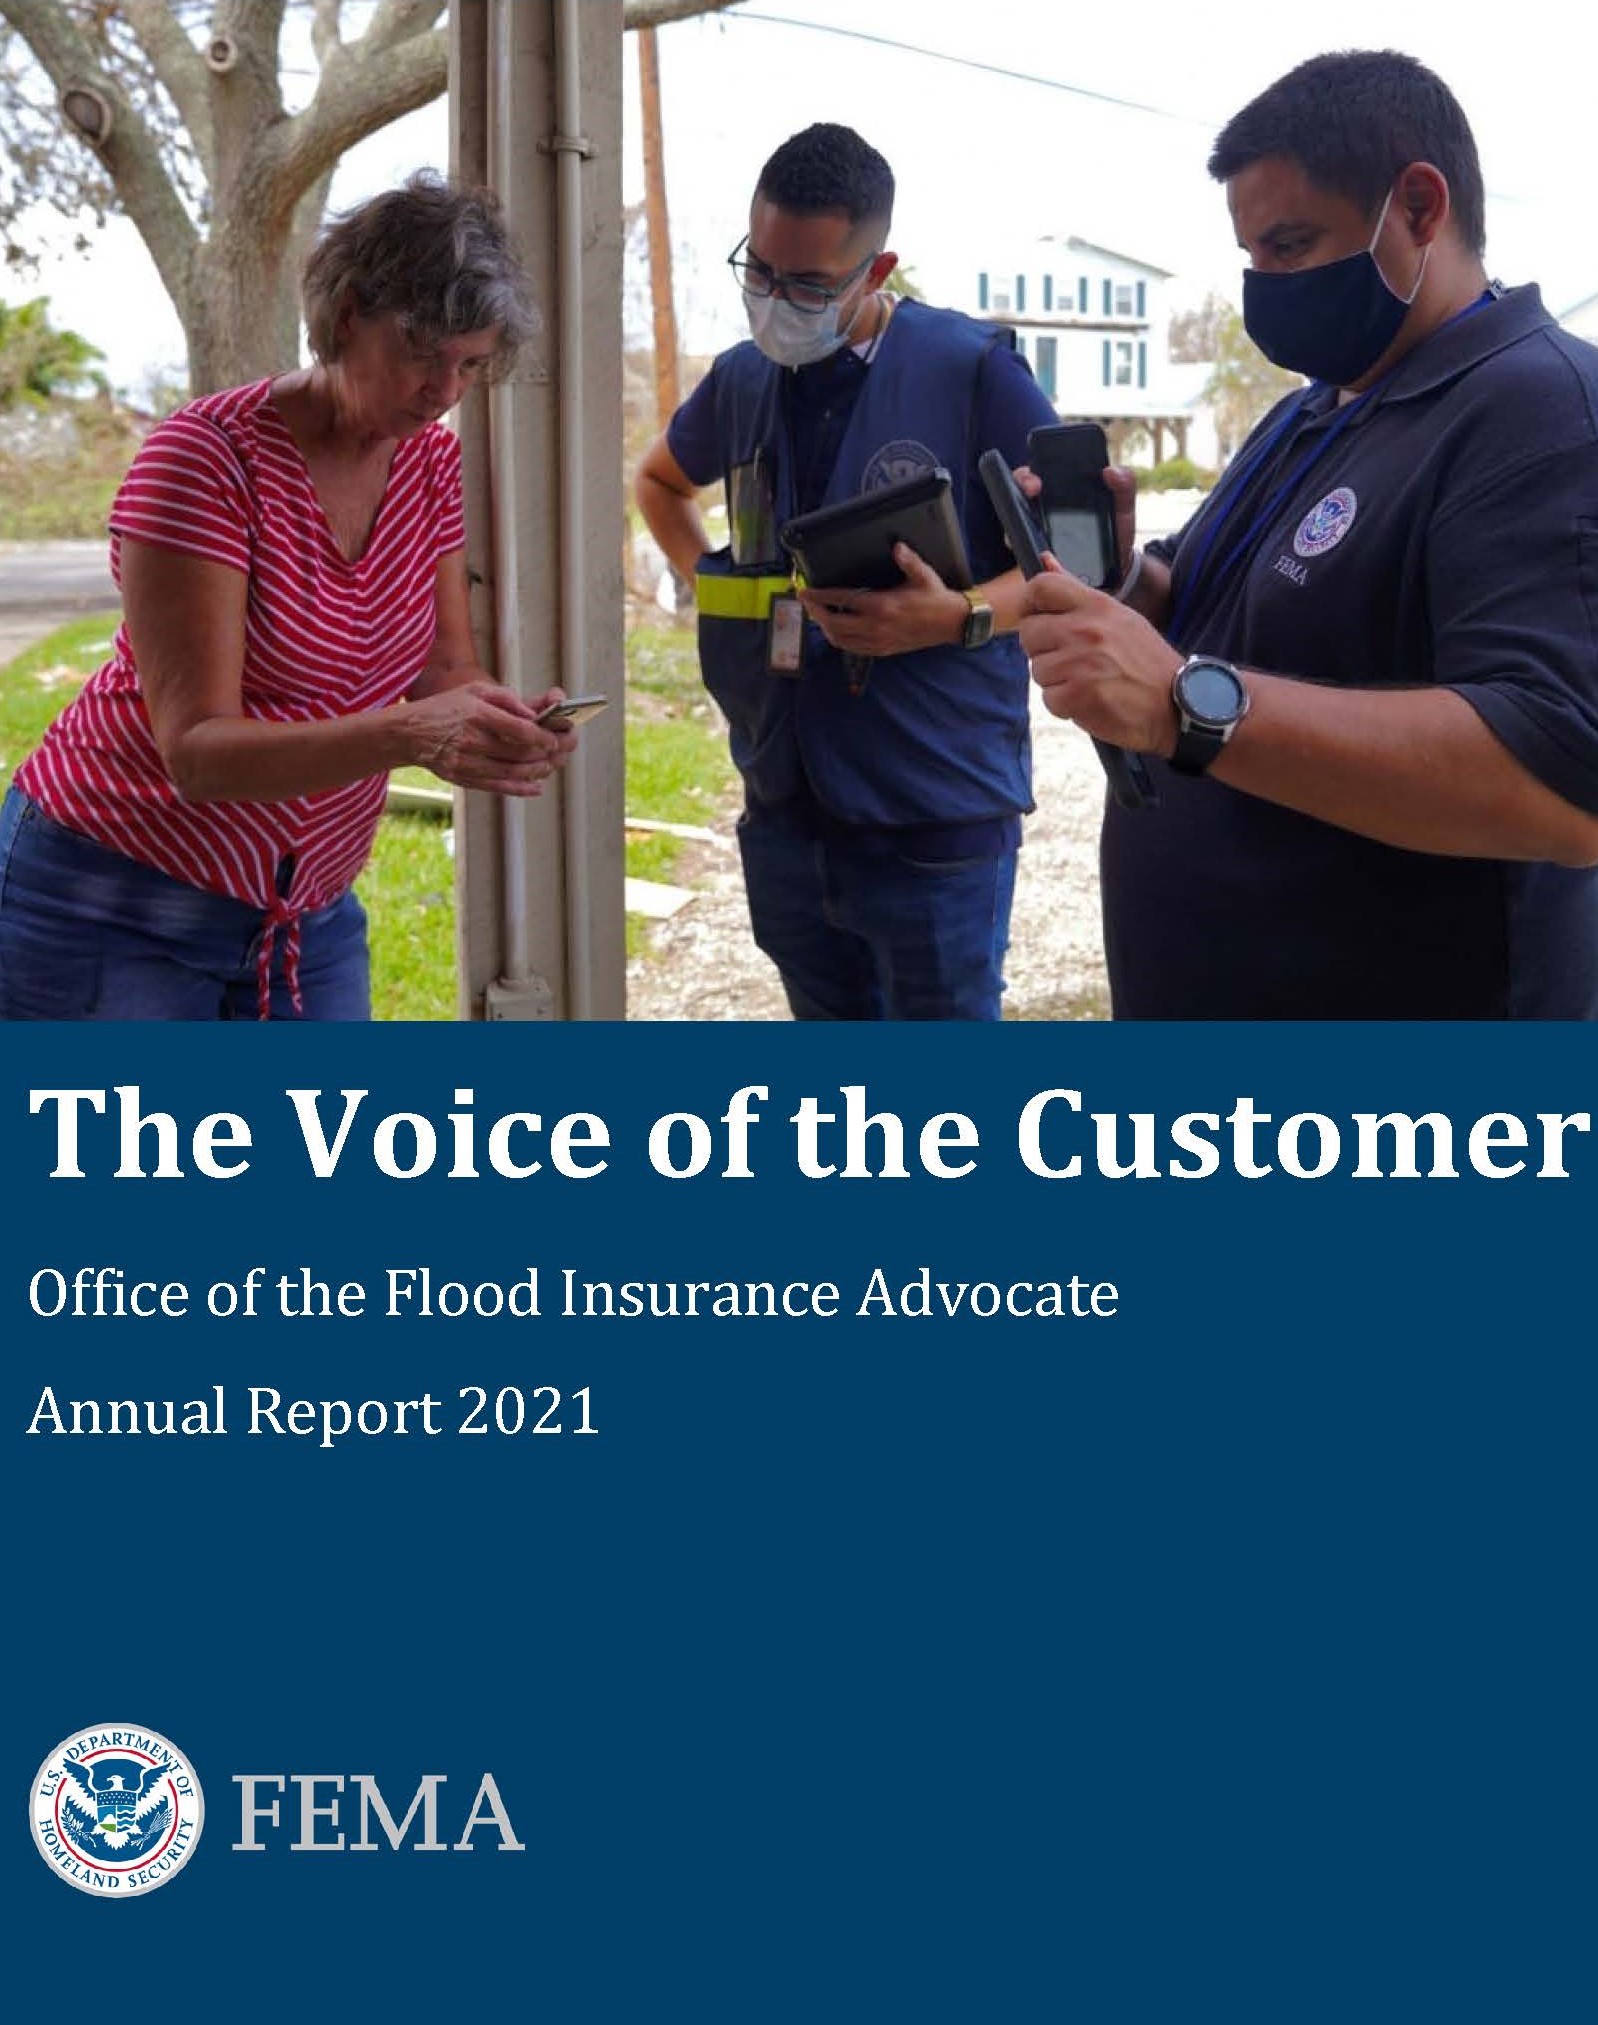 OFIA 2021 Annual Report: The Voice of the Customer coverpage